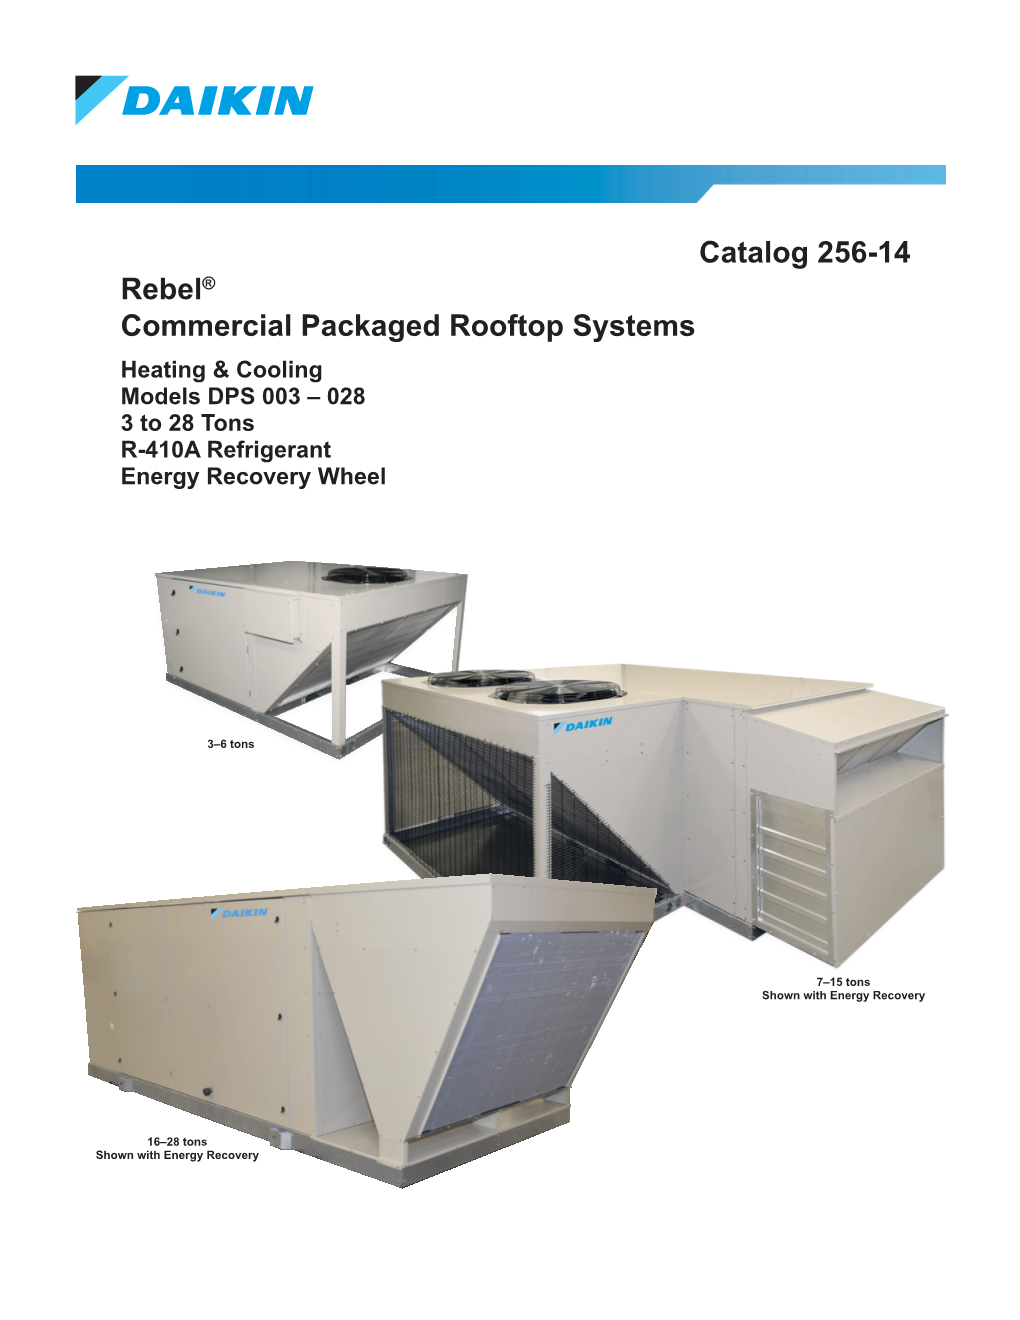 Rebel® Commercial Packaged Rooftop Systems Heating & Cooling Models DPS 003 – 028 3 to 28 Tons R-410A Refrigerant Energy Recovery Wheel